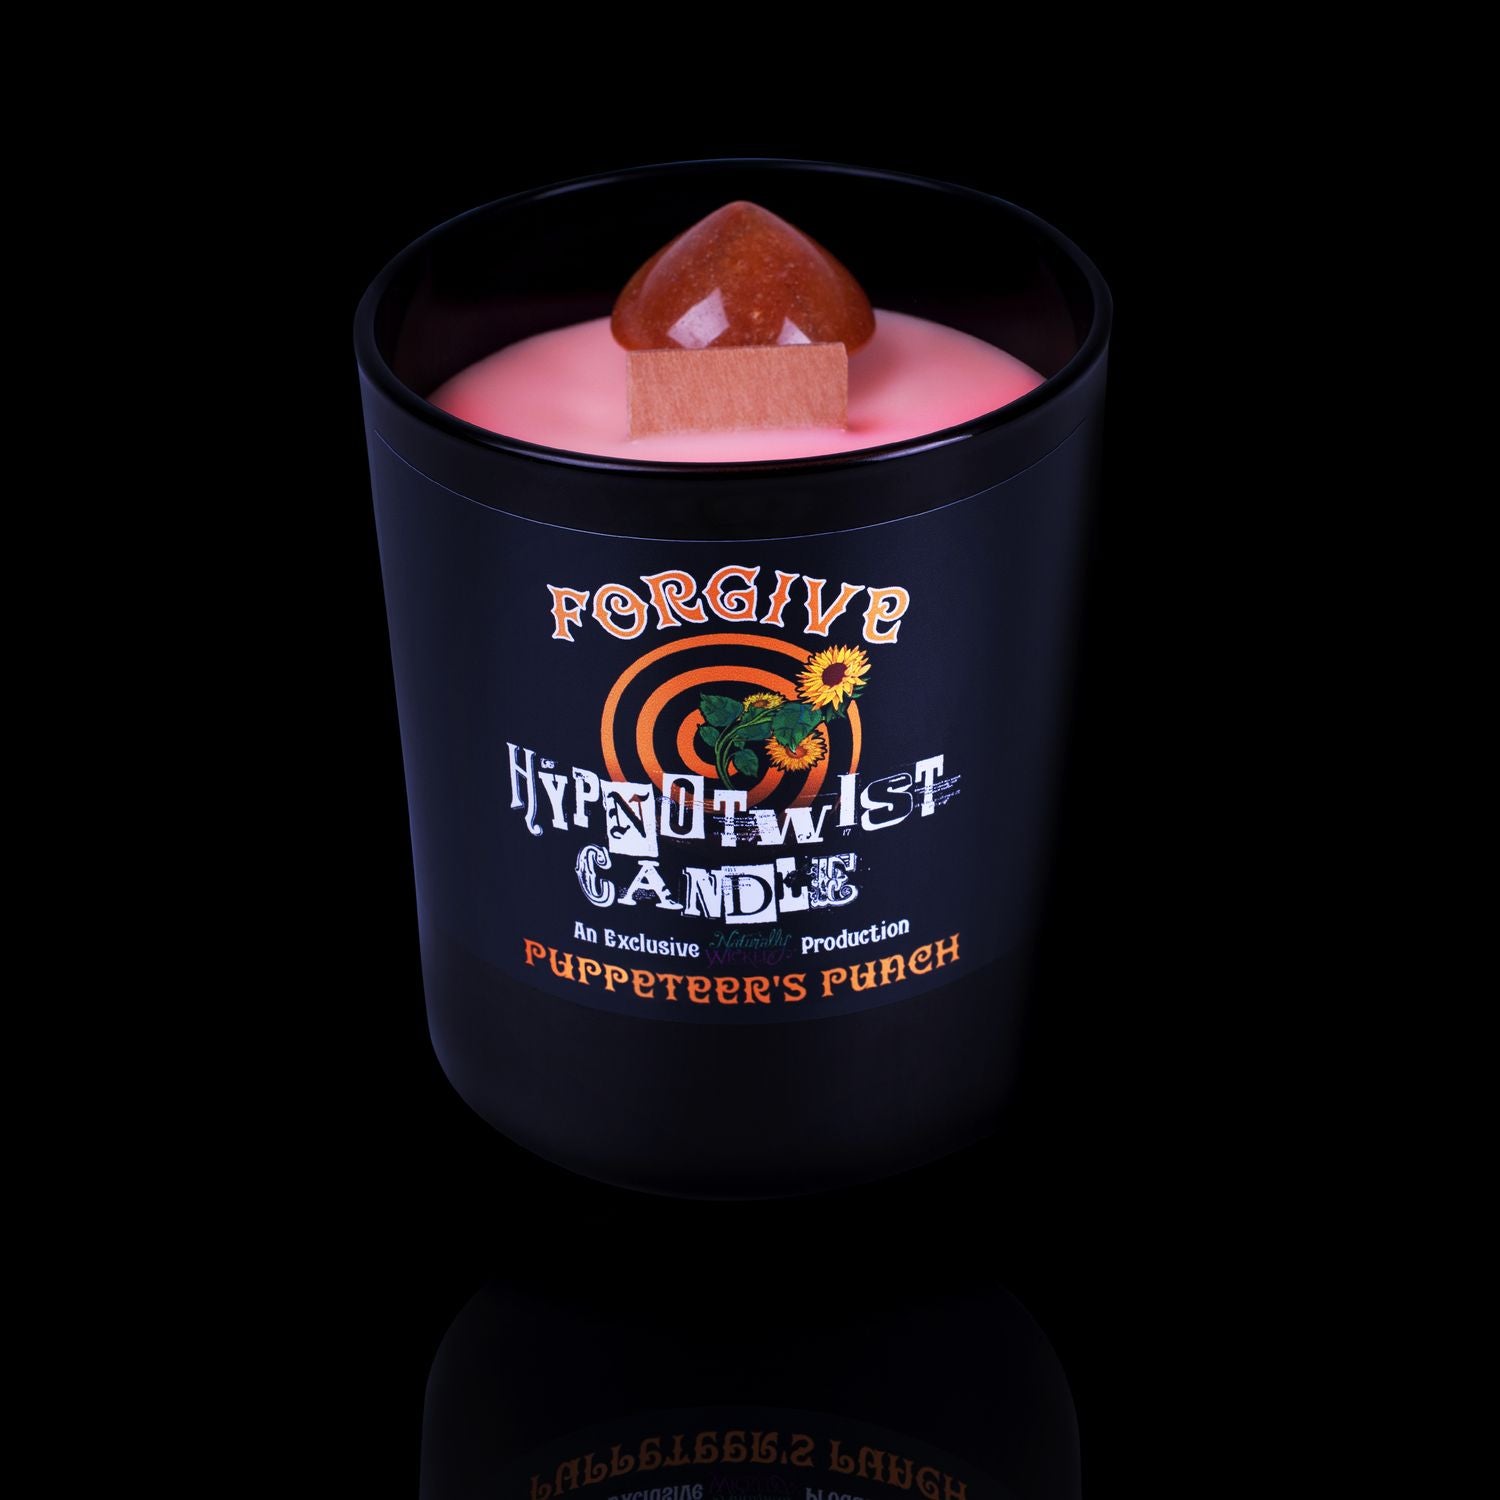 Naturally Wicked Hypnotwist Forgive Candle Featuring Plant-based Soy Orange Wax Scented with Puppeteer's Punch & Includes An Orange Aventurine Crystal Spinning Top.